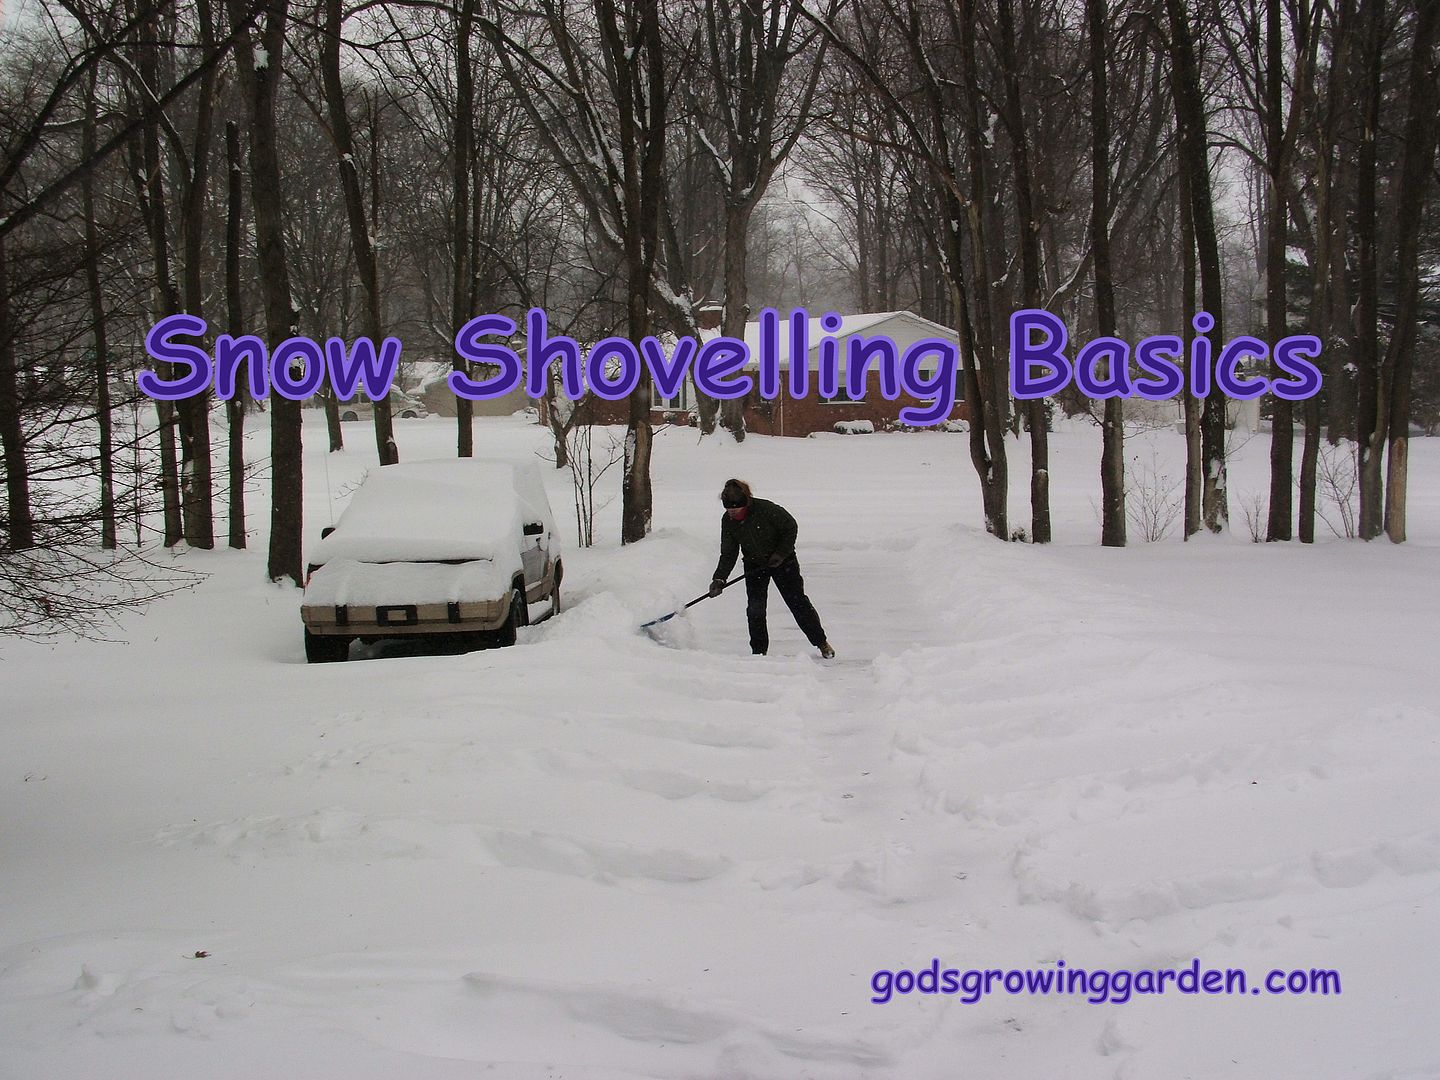 Snow Shovelling by Angie Ouellette-Tower for godsgrowinggarden.com photo 006_zpsb61d212c.jpg